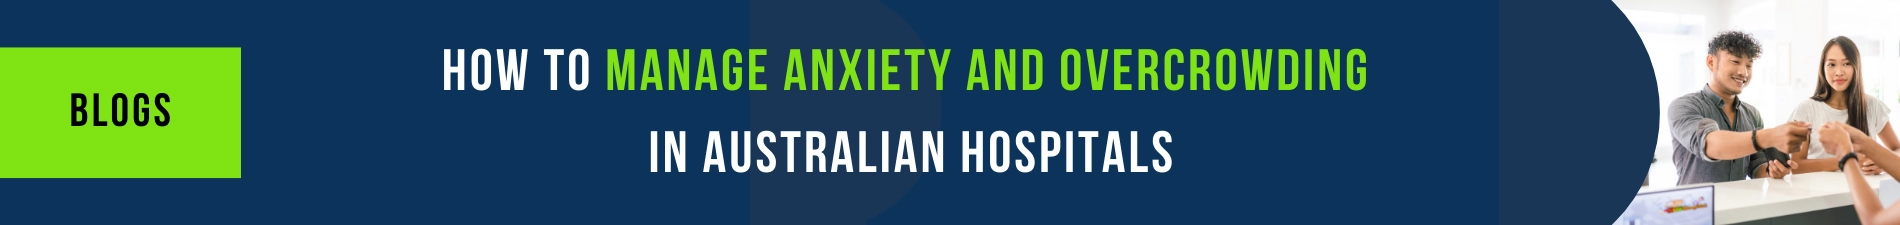 How to manage anxiety and overcrowding in Australian Hospitals